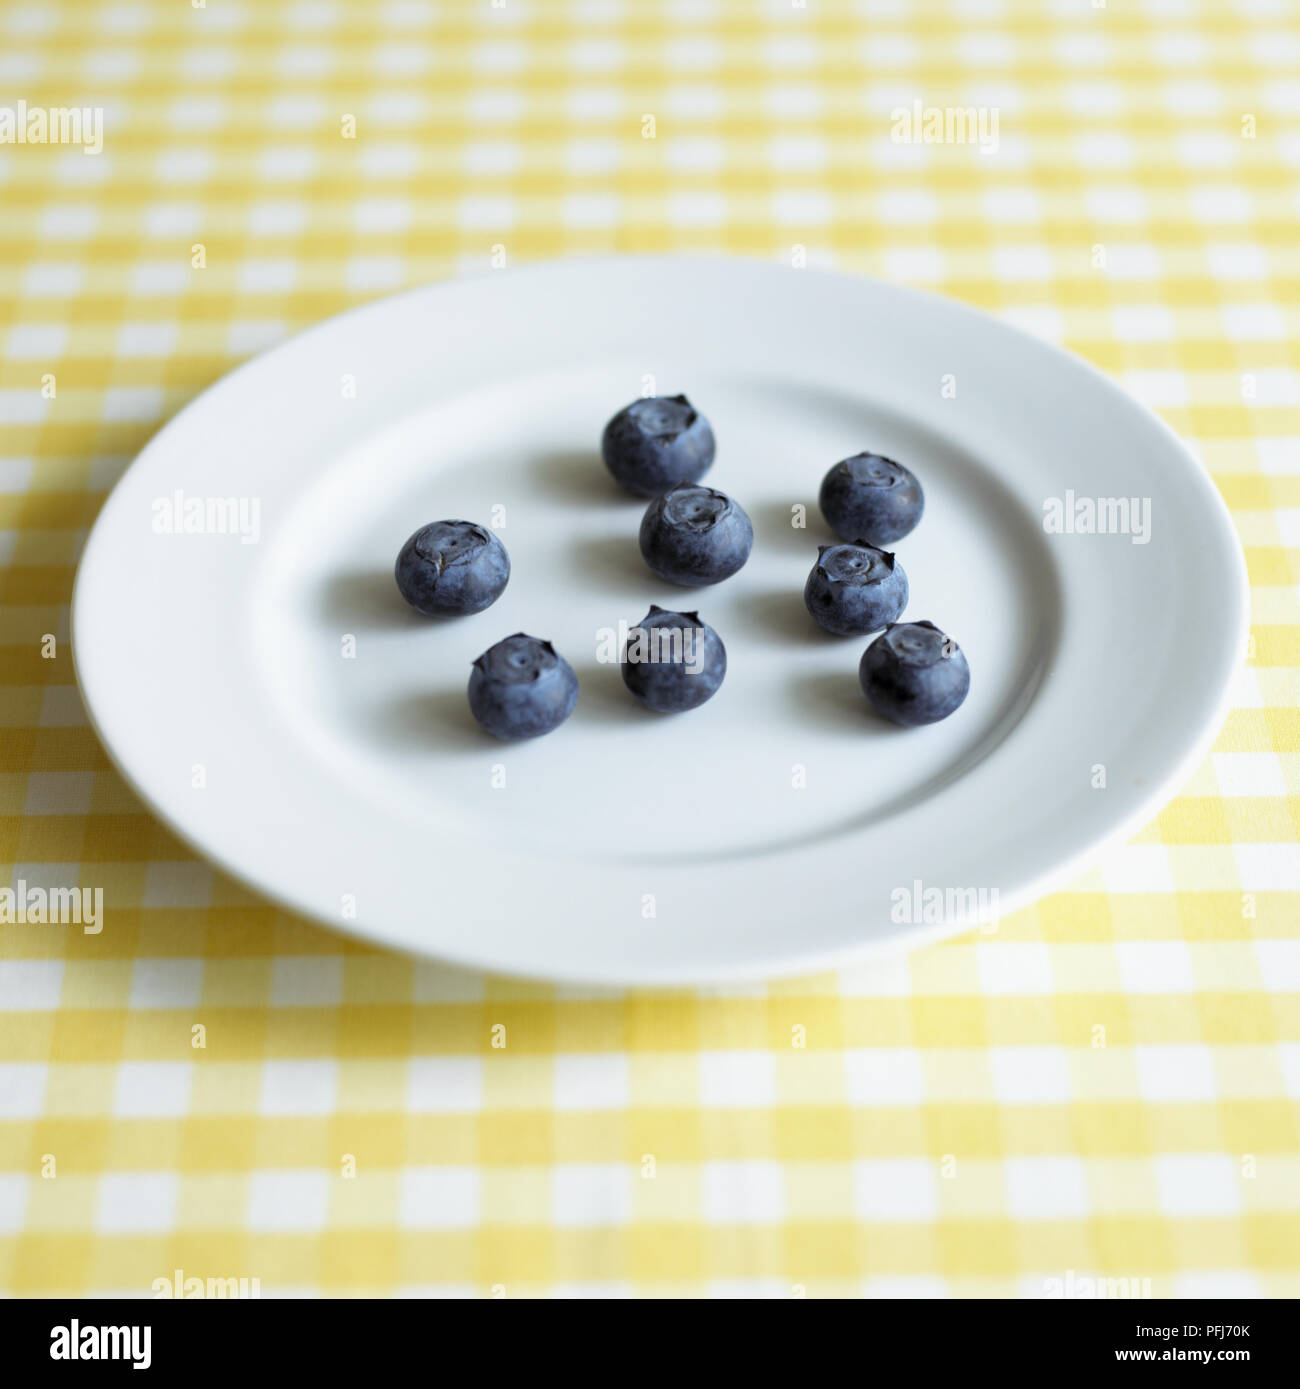 Vaccinium sp., Blue Berries, plate of blue berries on yellow chequered cloth. Stock Photo